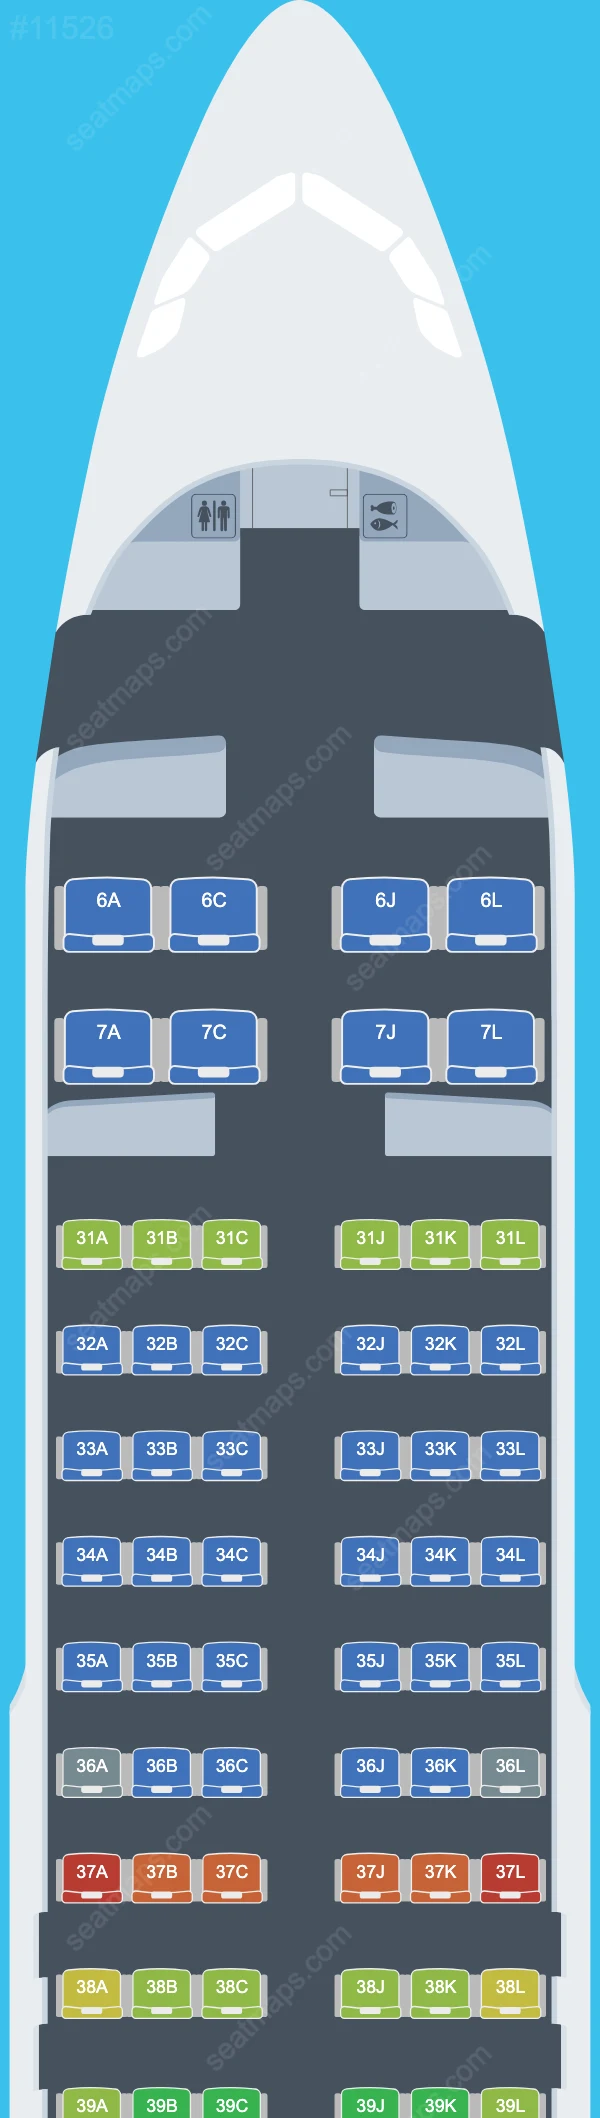 China Eastern Airbus A320-200neo V.1 seatmap mobile preview